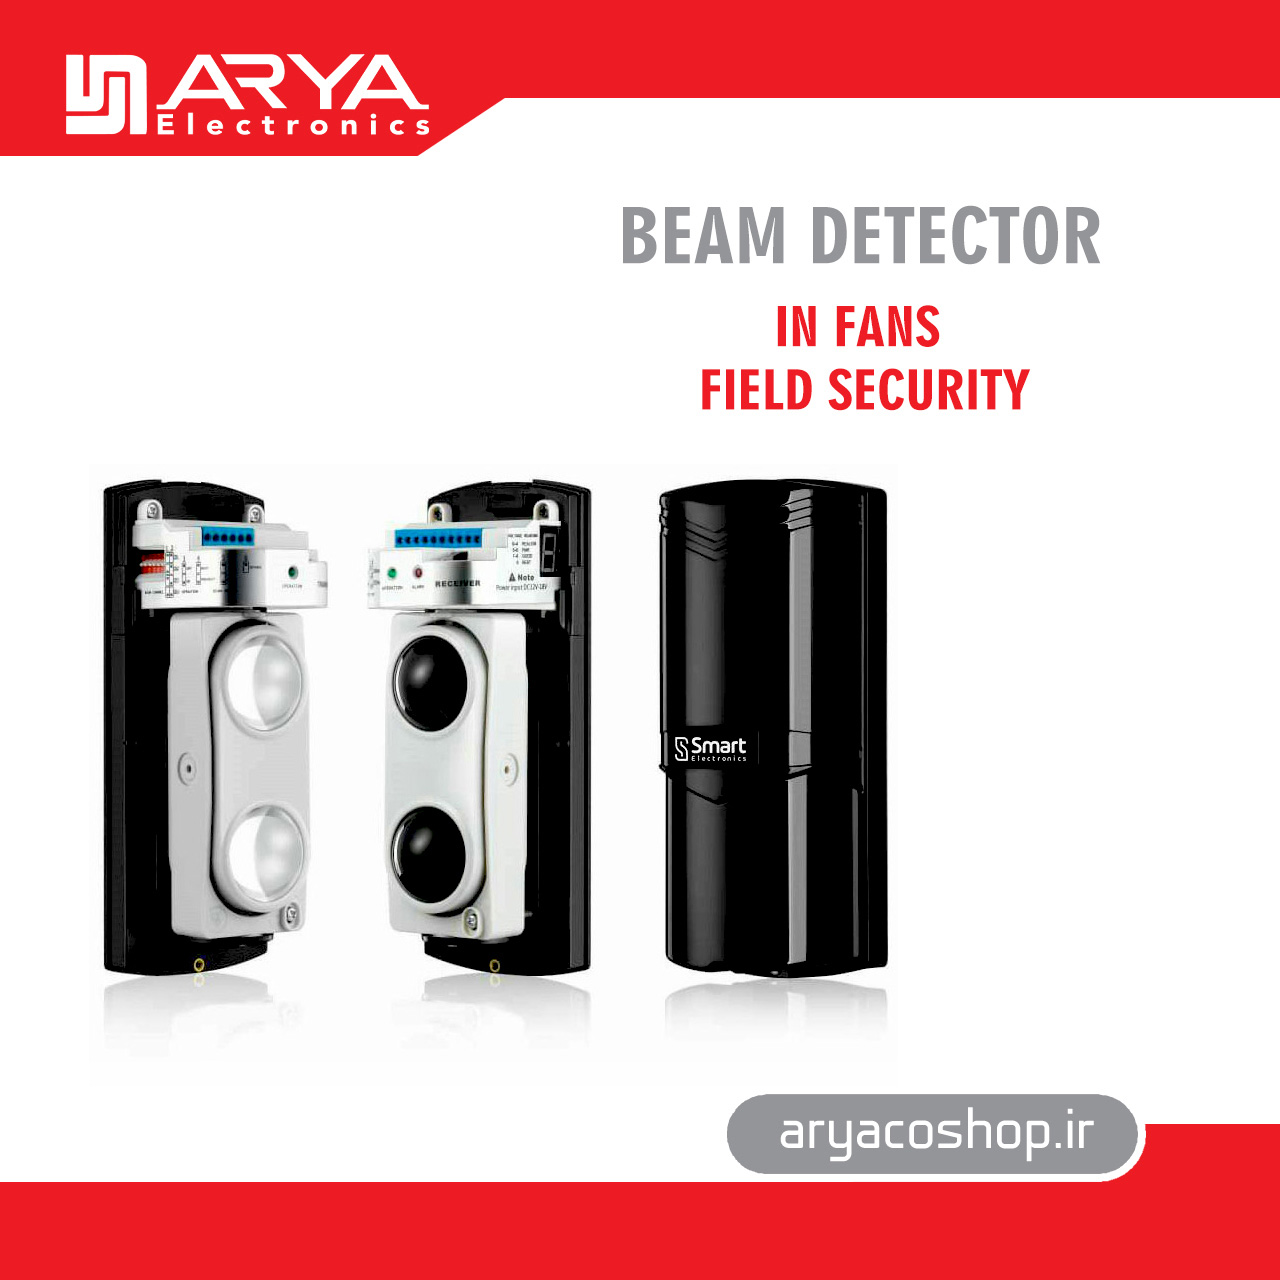 "BEAM DETECTOR IN FANS FIELD SECURITY"